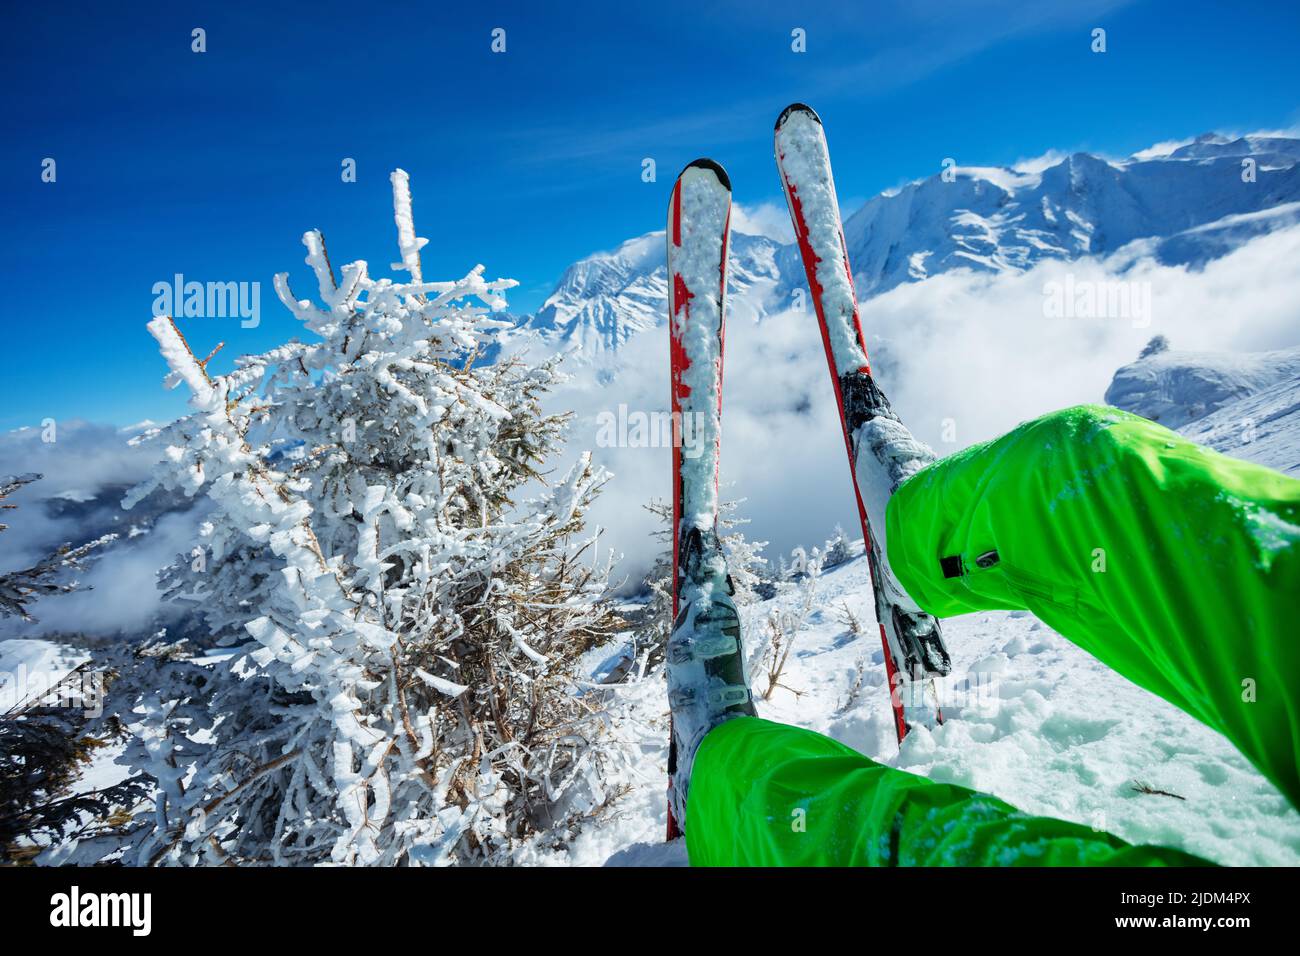 Skier legs and ski close-up over mountain peaks Stock Photo